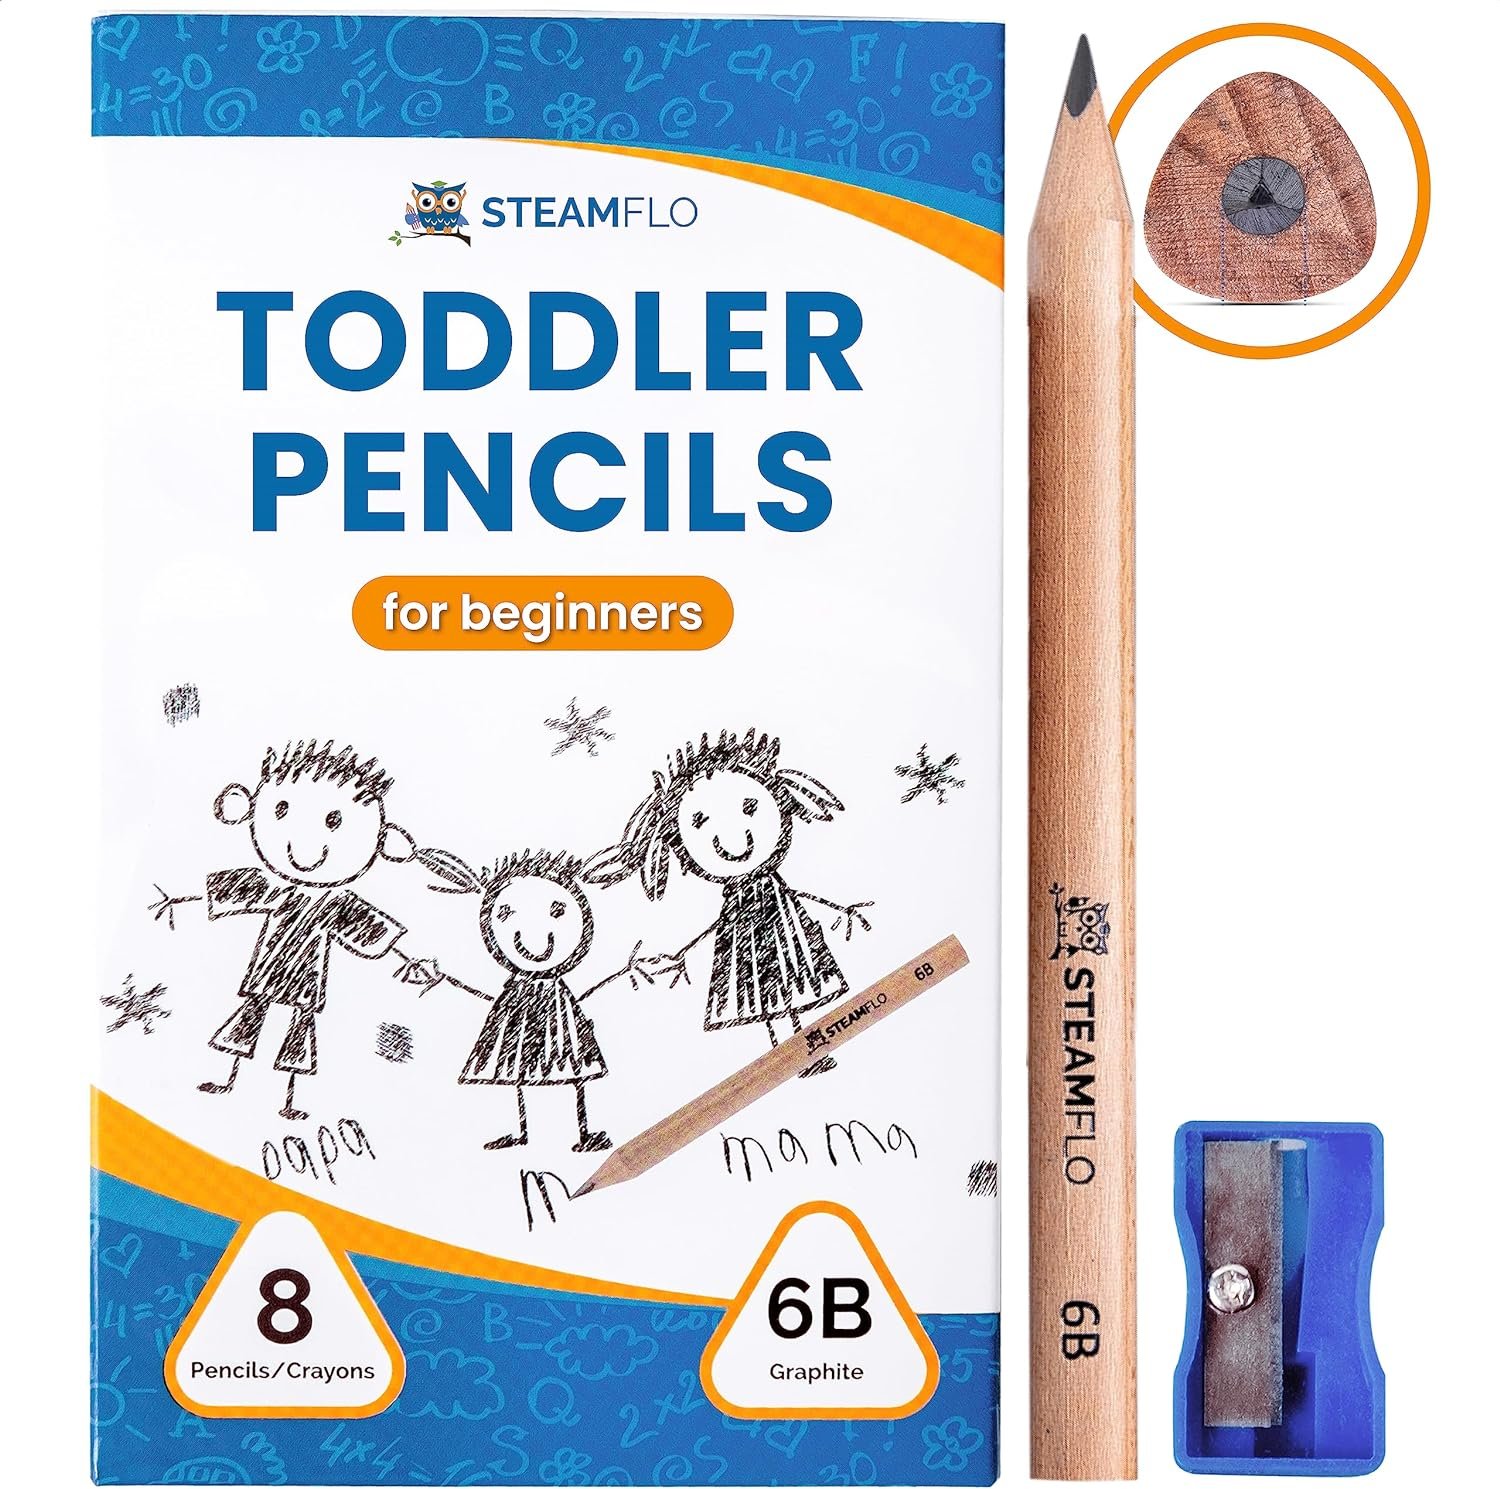 The VERY BEST Pencils for Toddlers